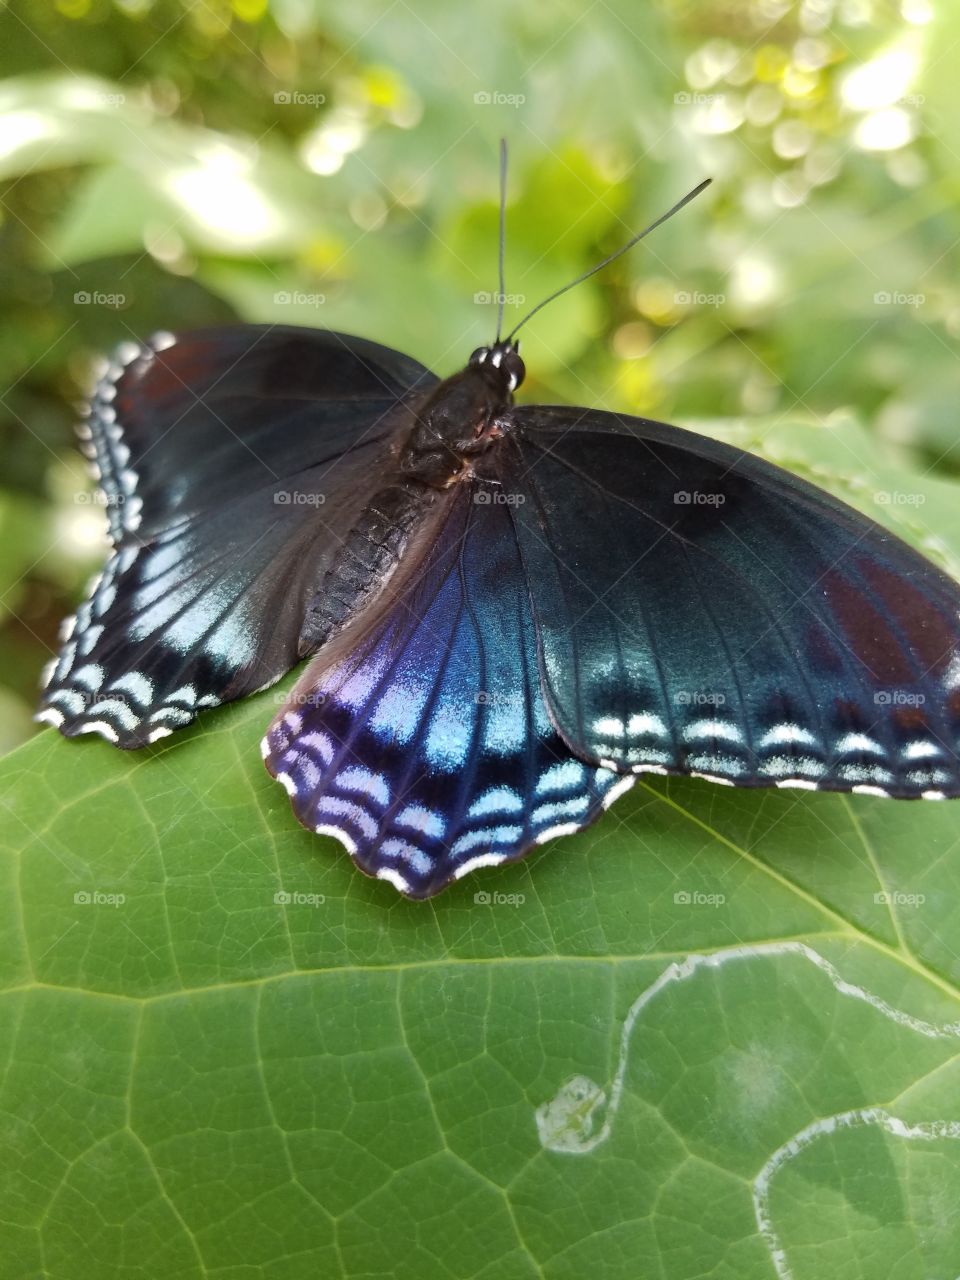 detail of a swallowtail butterfly